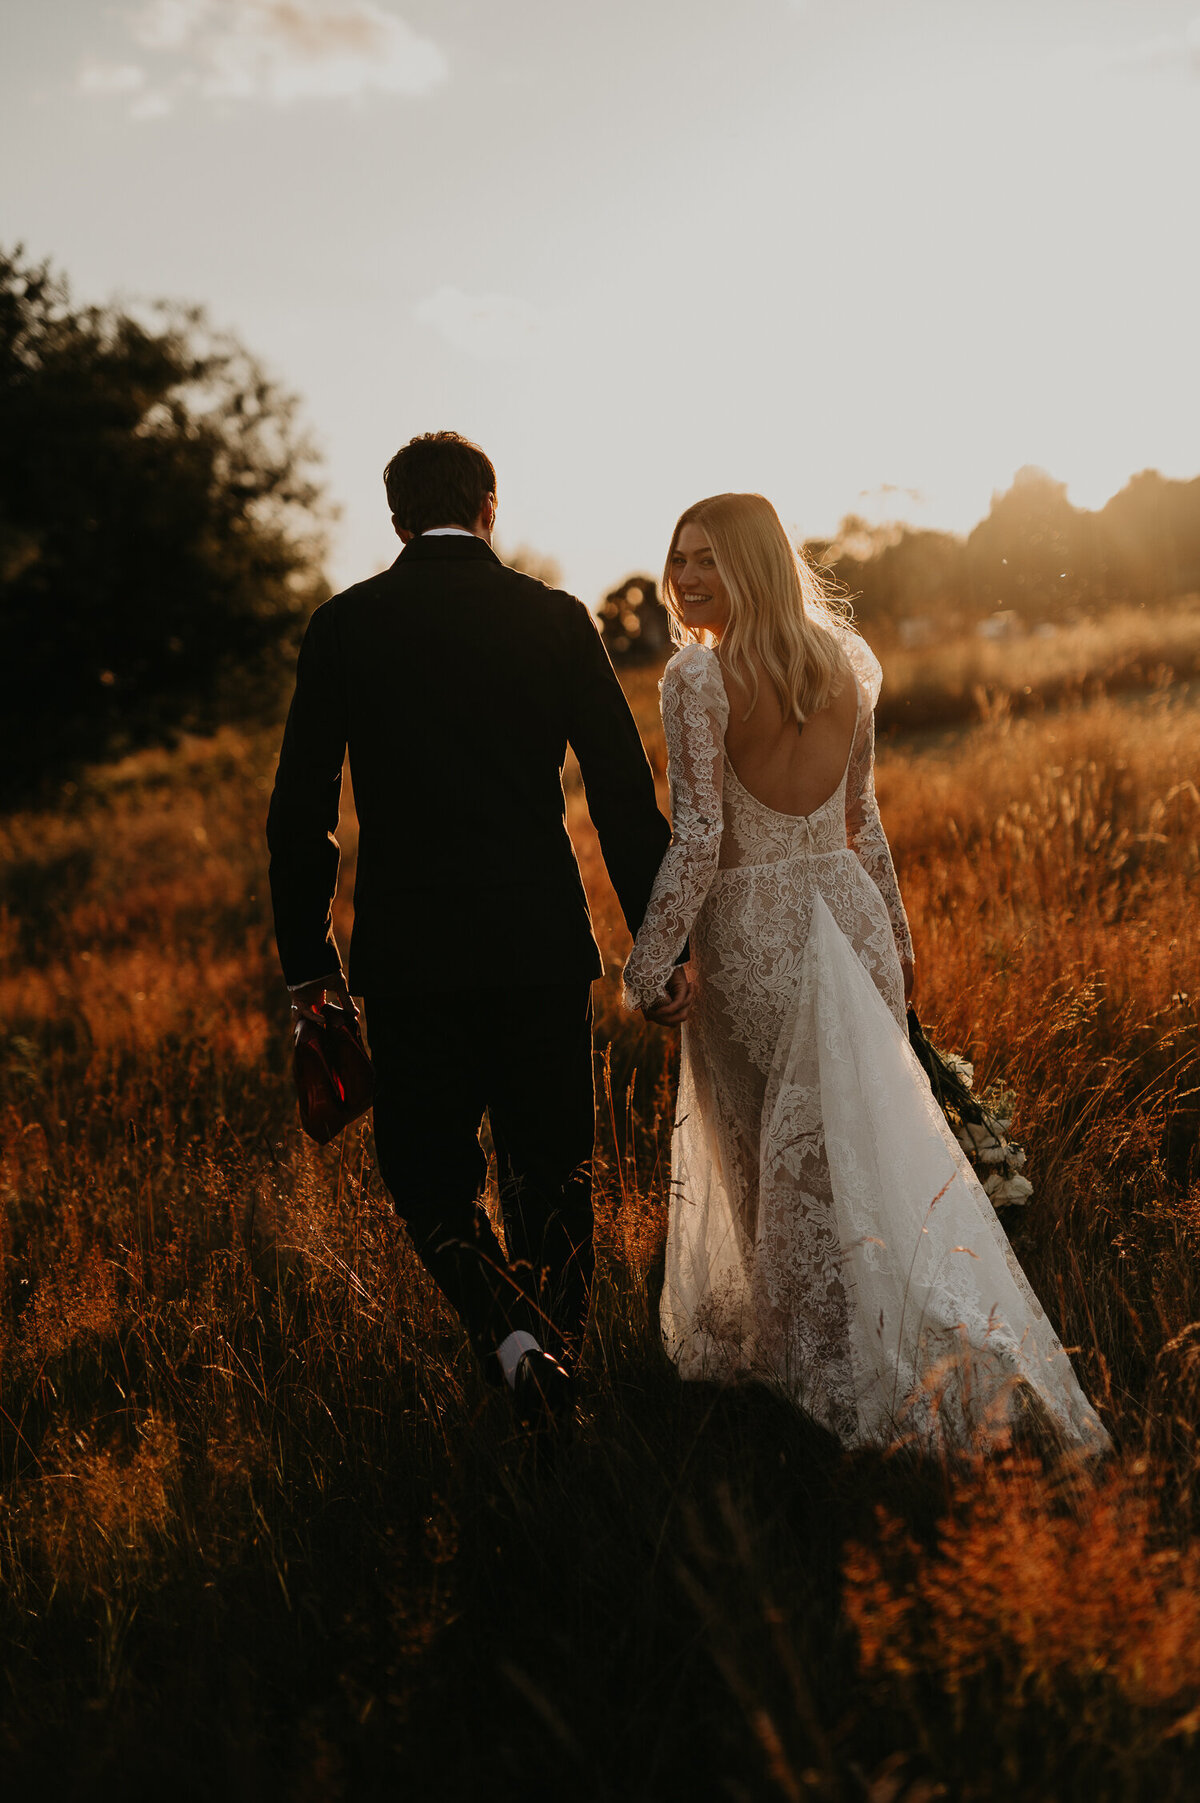 A bride looks back as she walks into the sunset with her groom at The Willow Marsh Farm.